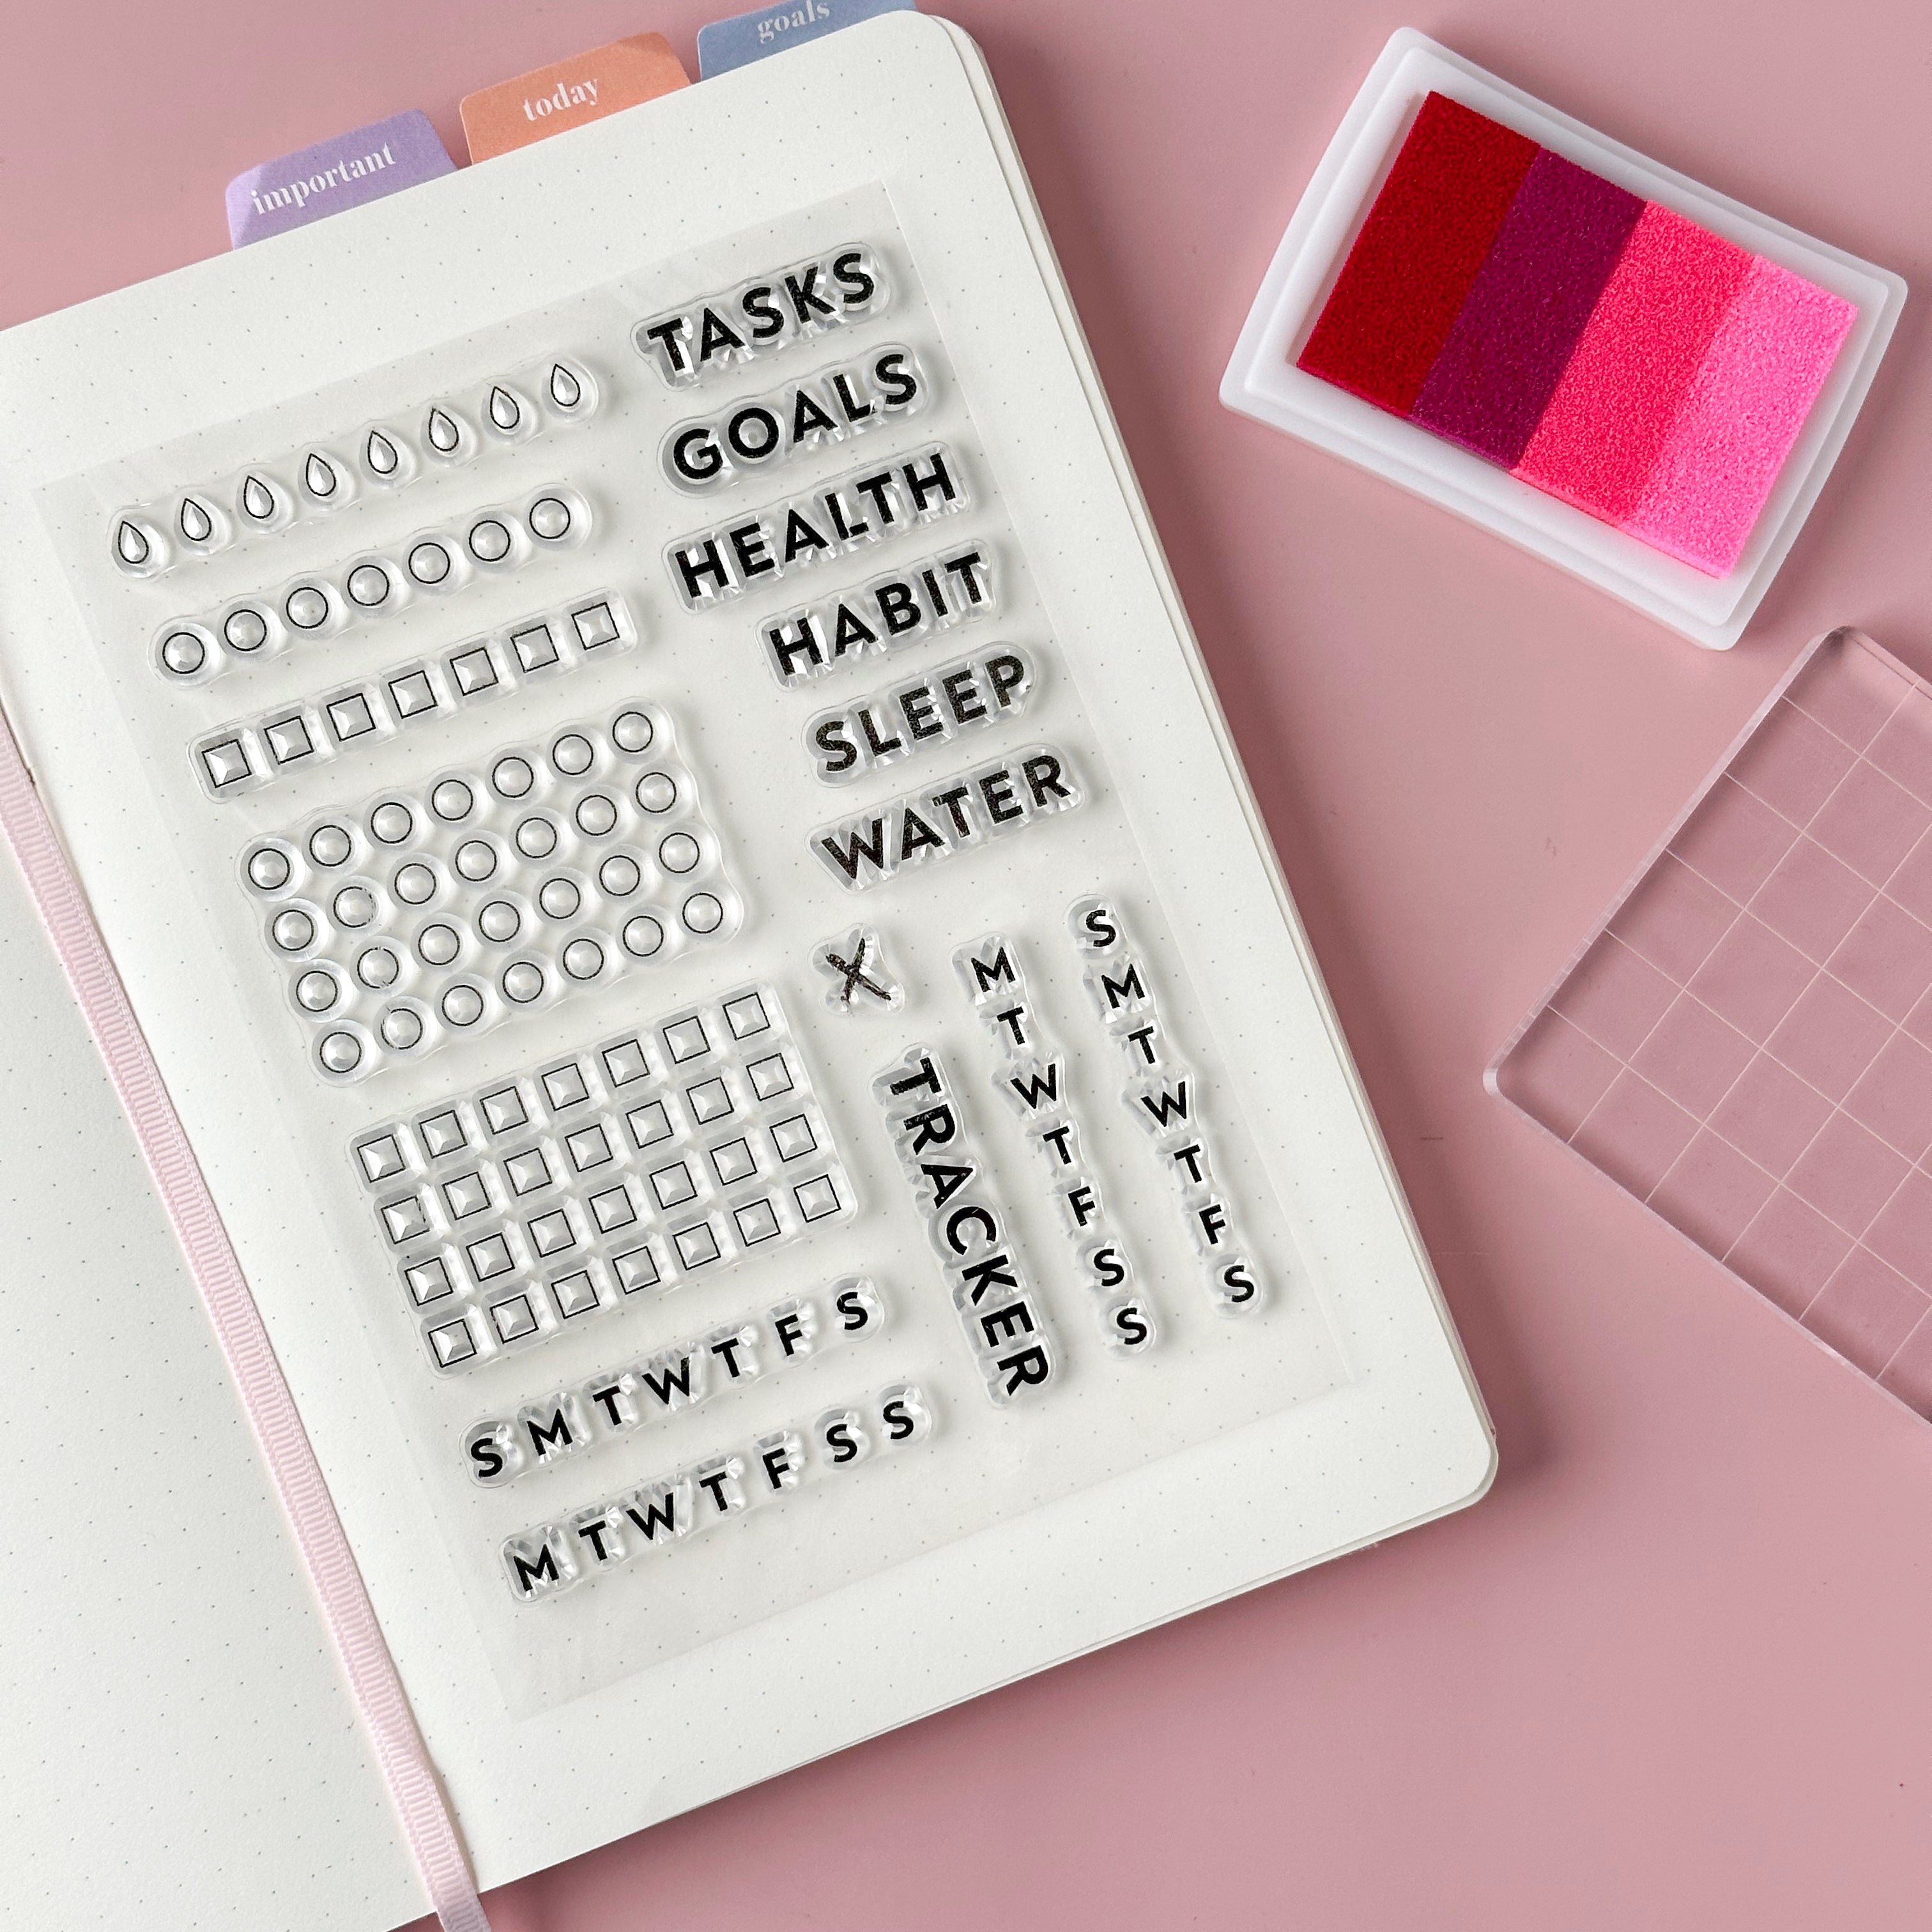 Track your habits with ease using our silicone stamp habit trackers, featuring a variety of customizable designs that can be easily stamped onto your planner or journal pages. This set includes some great checklist options These stamps are sold at BBB Supplies Craft Shop.